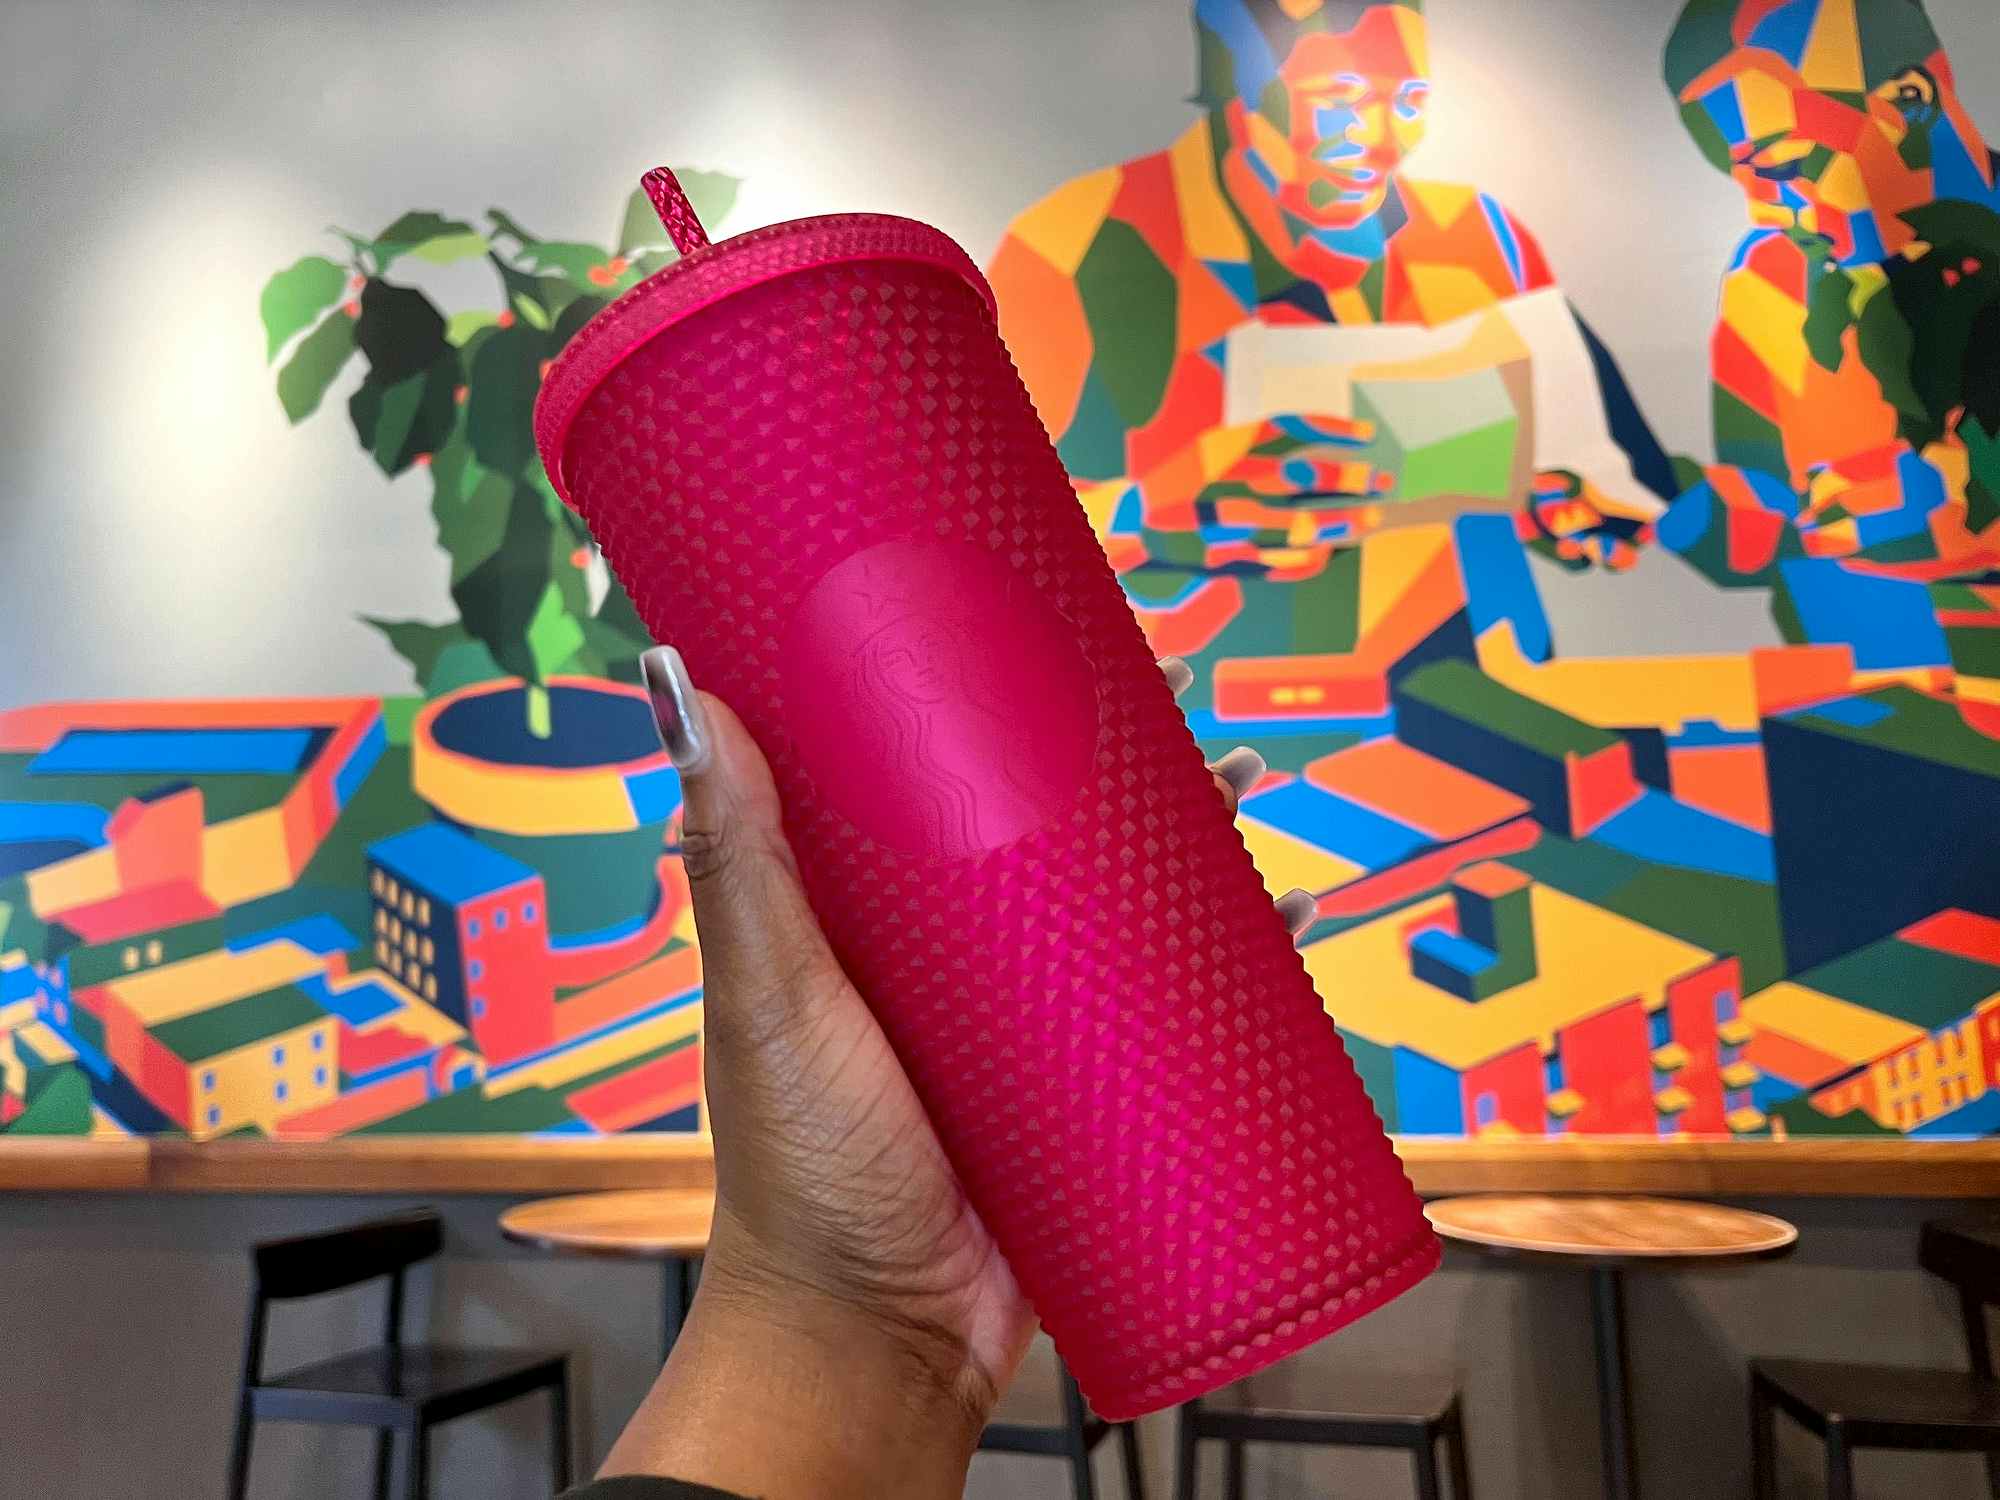 hand holding the spring 2023 ruby bling cold cup tumbler in starbucks restaurant